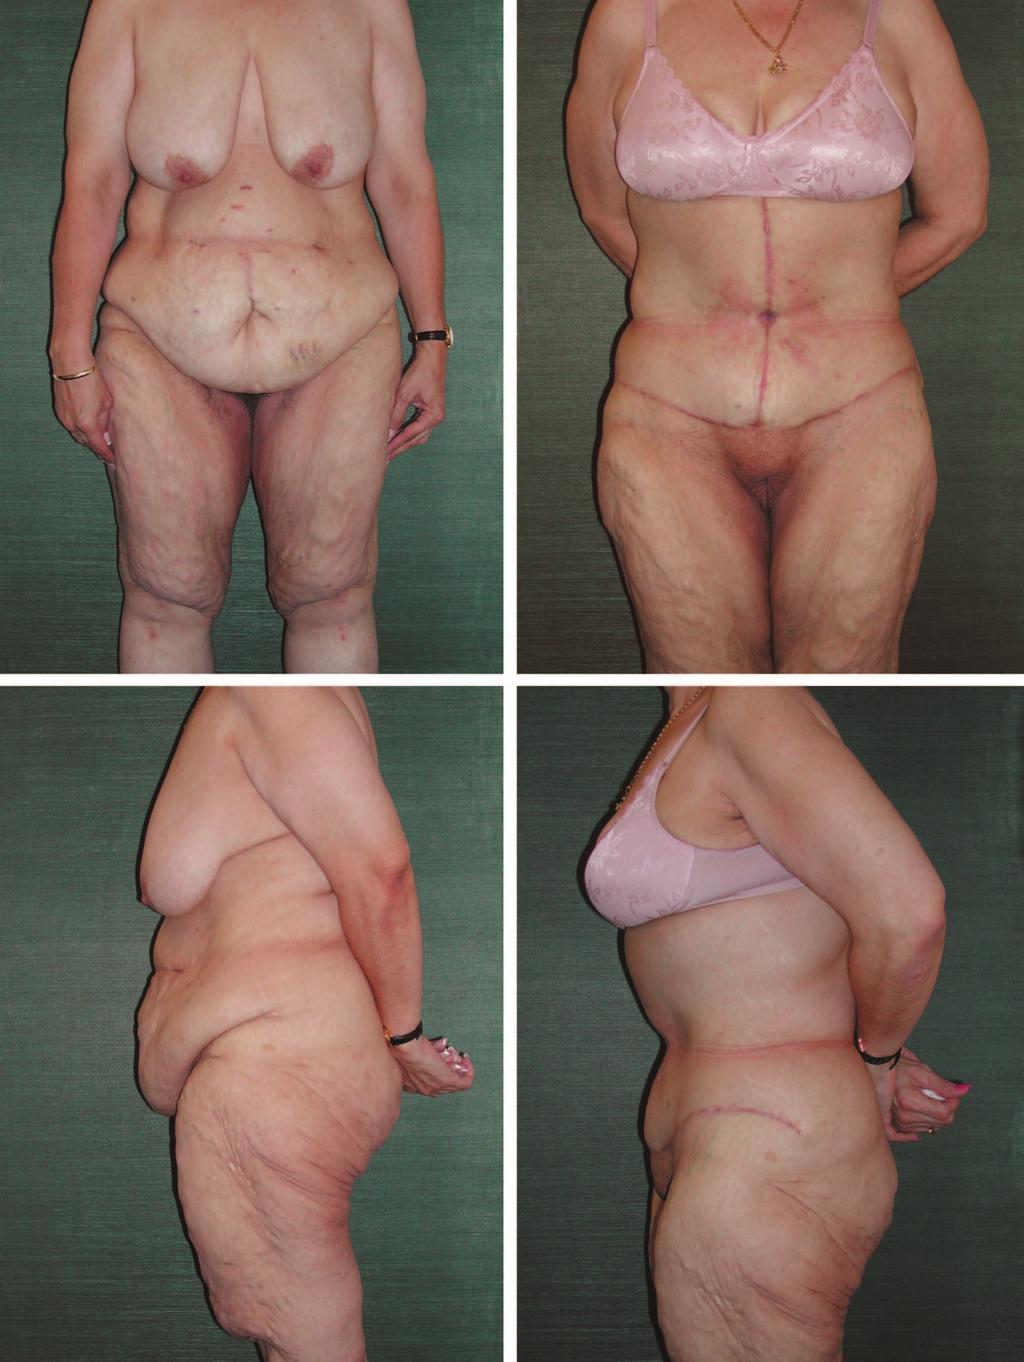 Volume 121, Number 4 Contouring after Massive Weight Loss Fig. 3. A 48-year-old woman, 5 feet 2 inches tall, after a 101-pound weight loss.